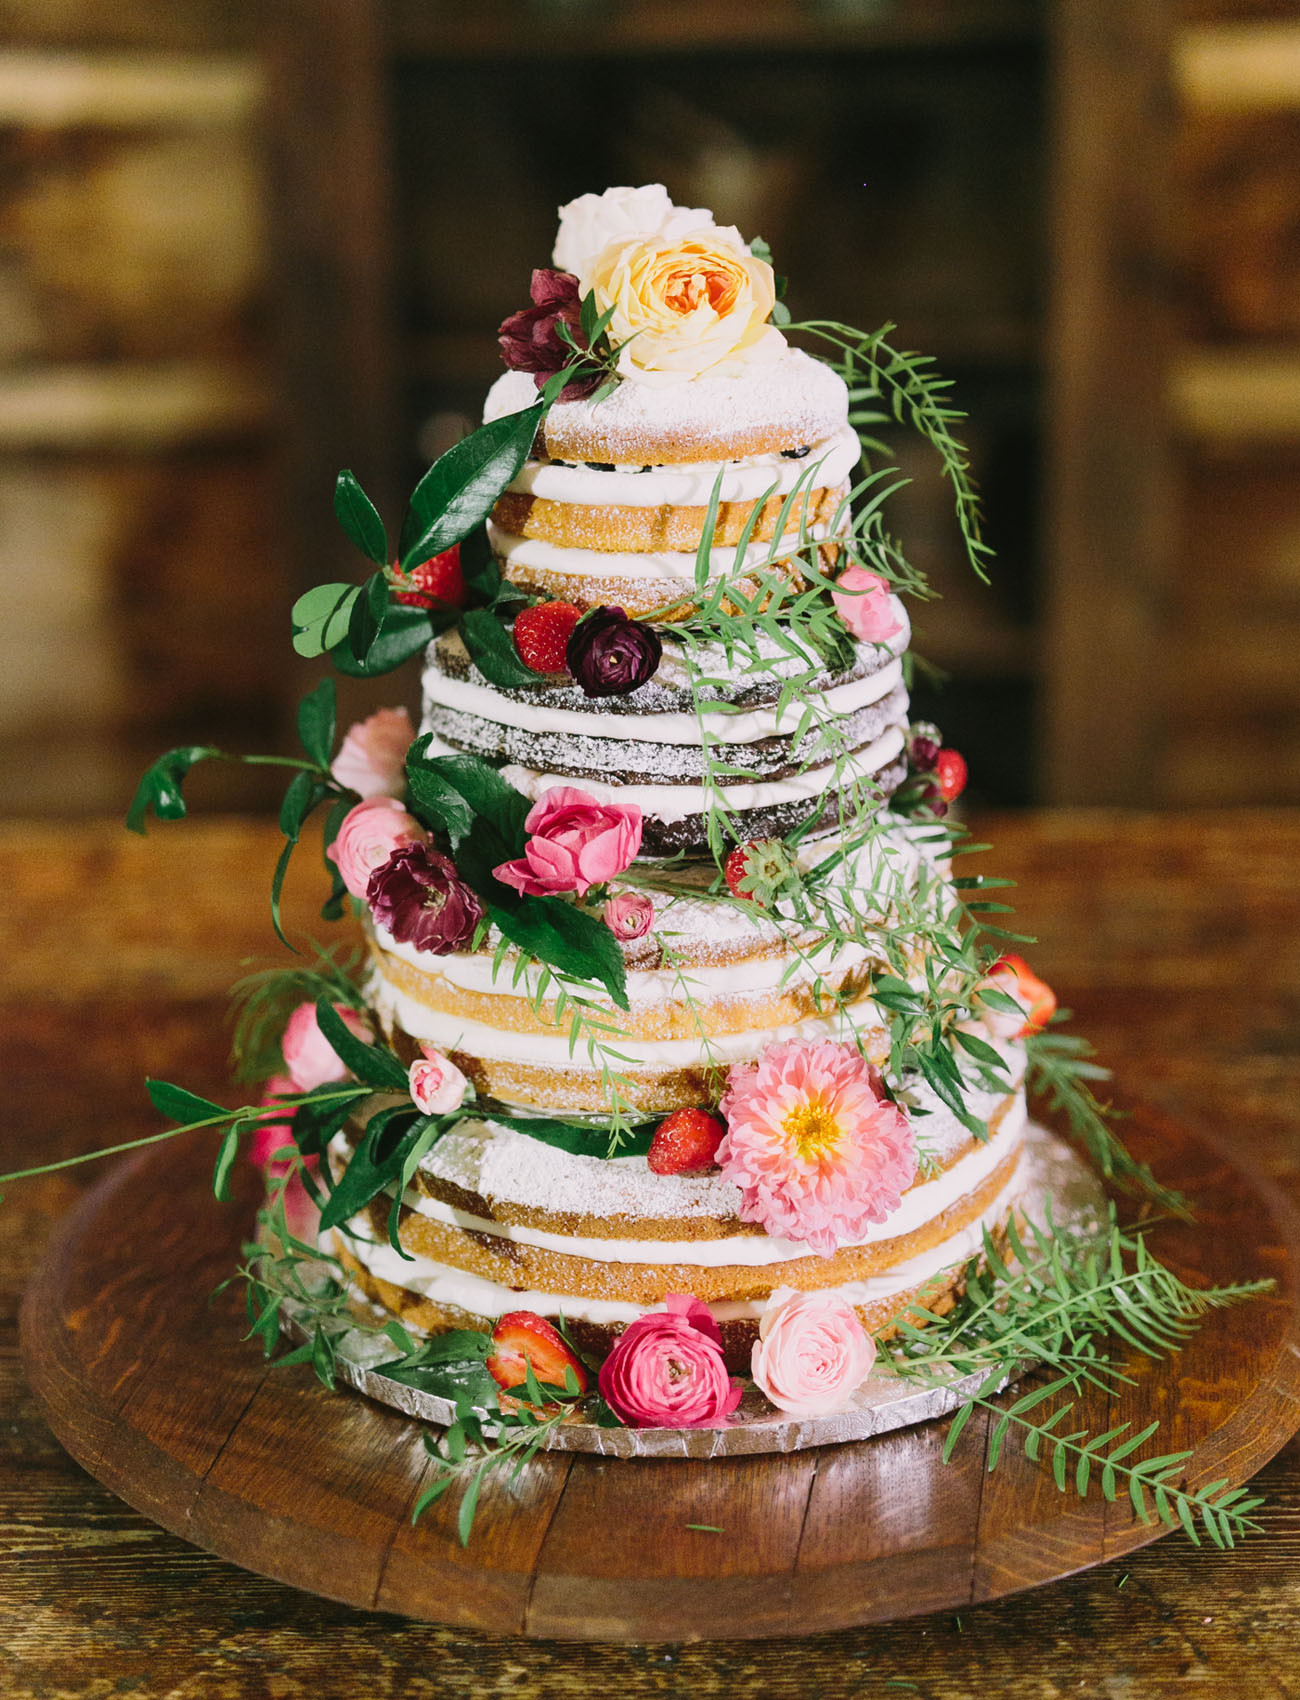 Bohemian Wedding Cakes
 Our Favorite Wedding Cakes from 2016